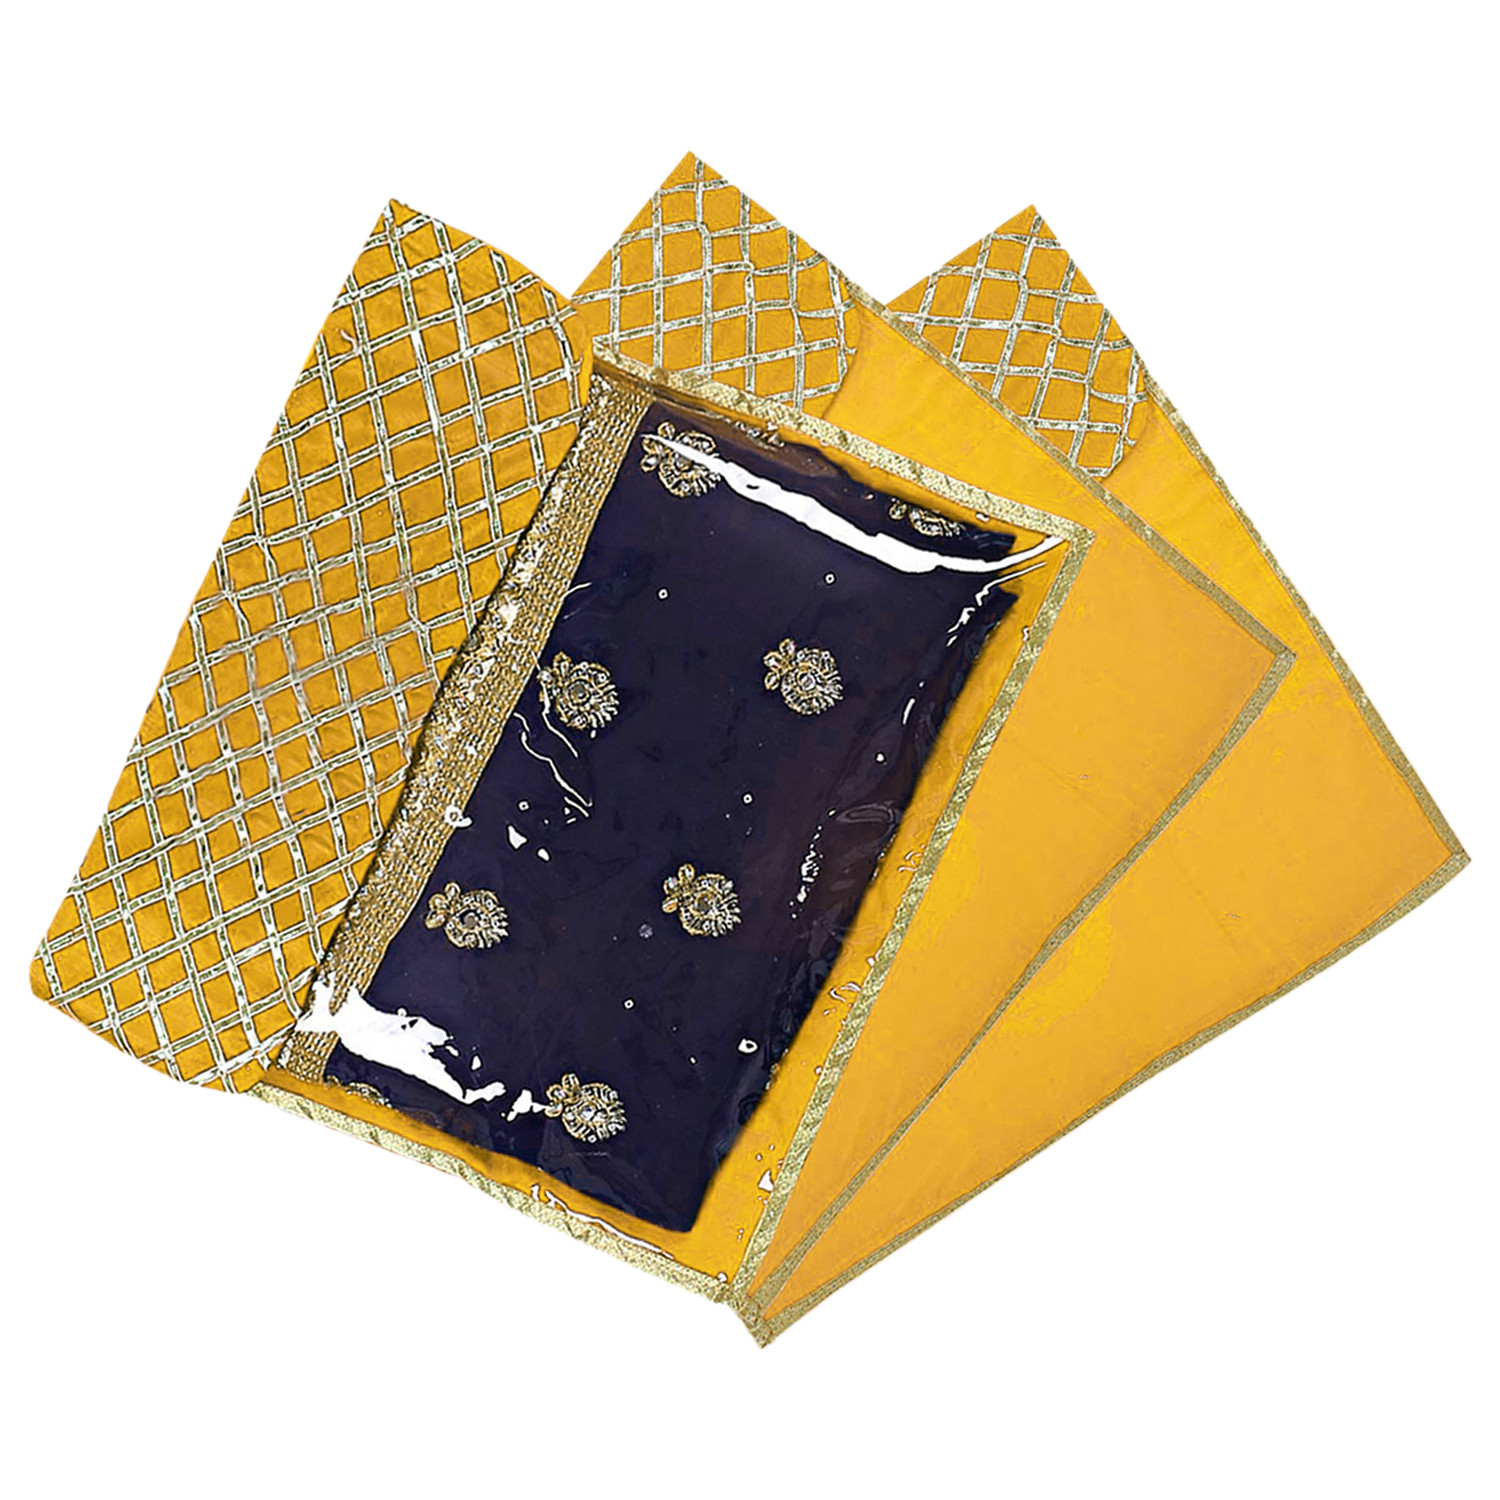 Kuber Industries Seamless lattice Design Satin Foldable, Lightweigth Single Saree Cover/Organiser For Wardrobe With Transparent Top-(Yellow)